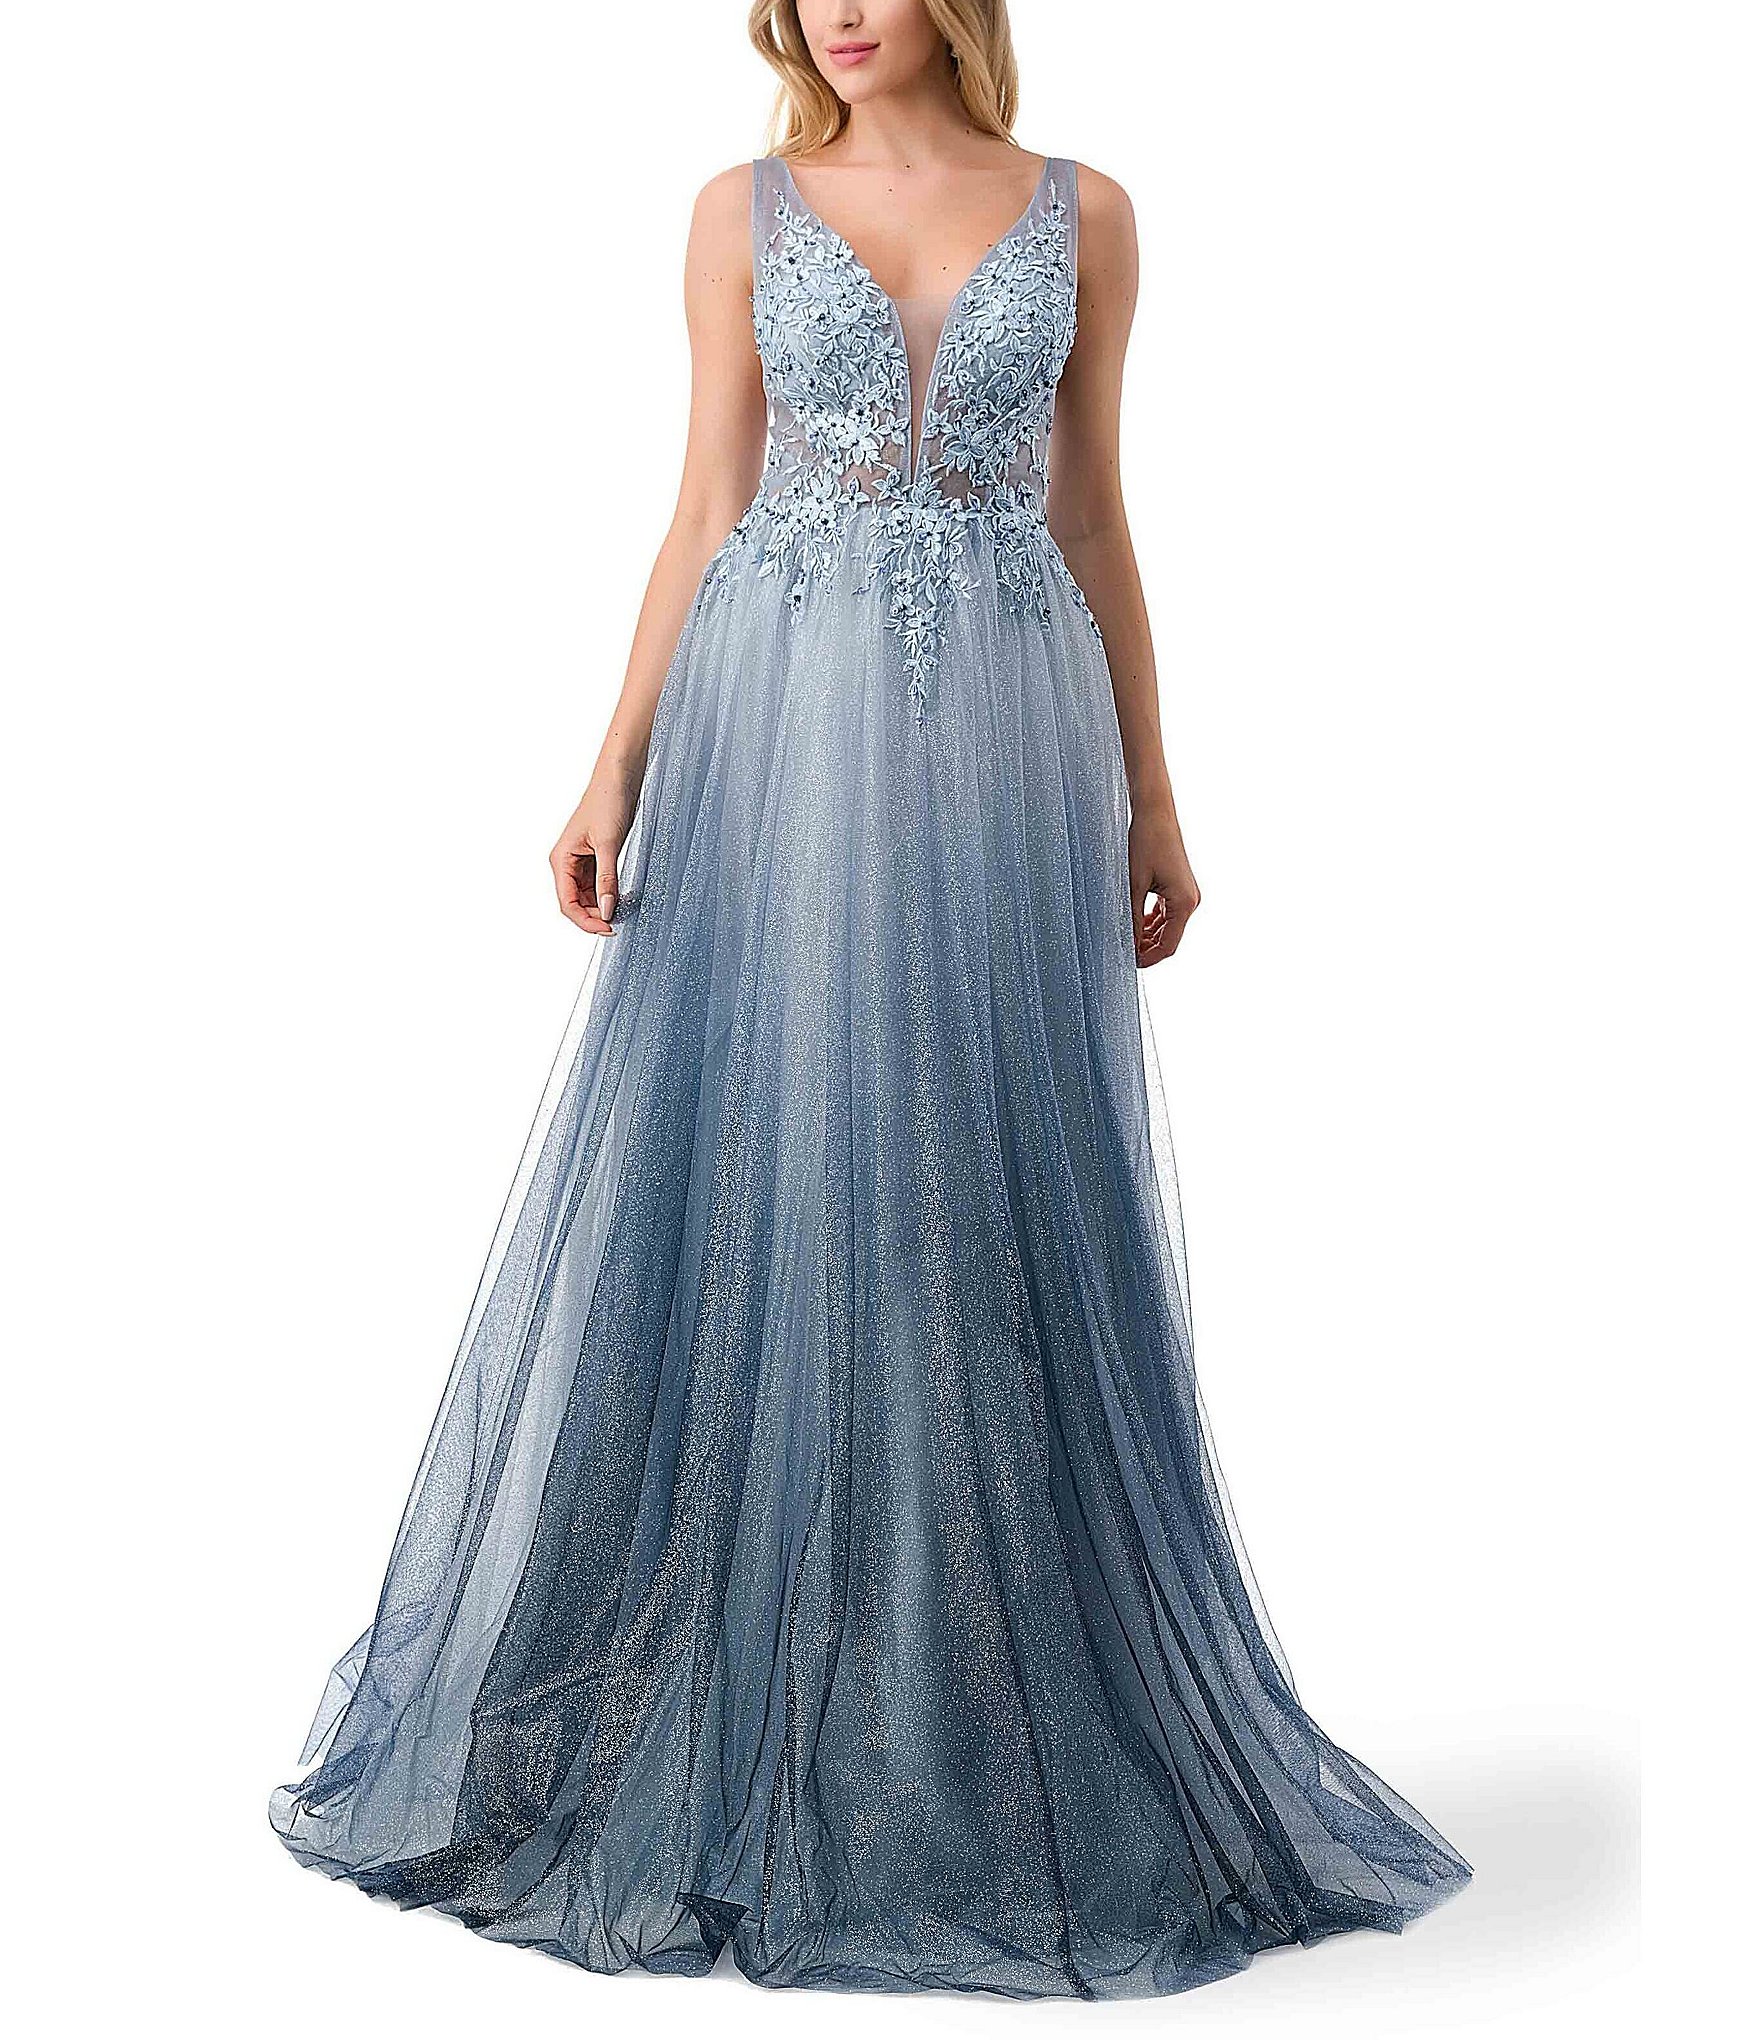 Embroidered Floral Illusion Mesh Ombre Ball Gown | Dillard's